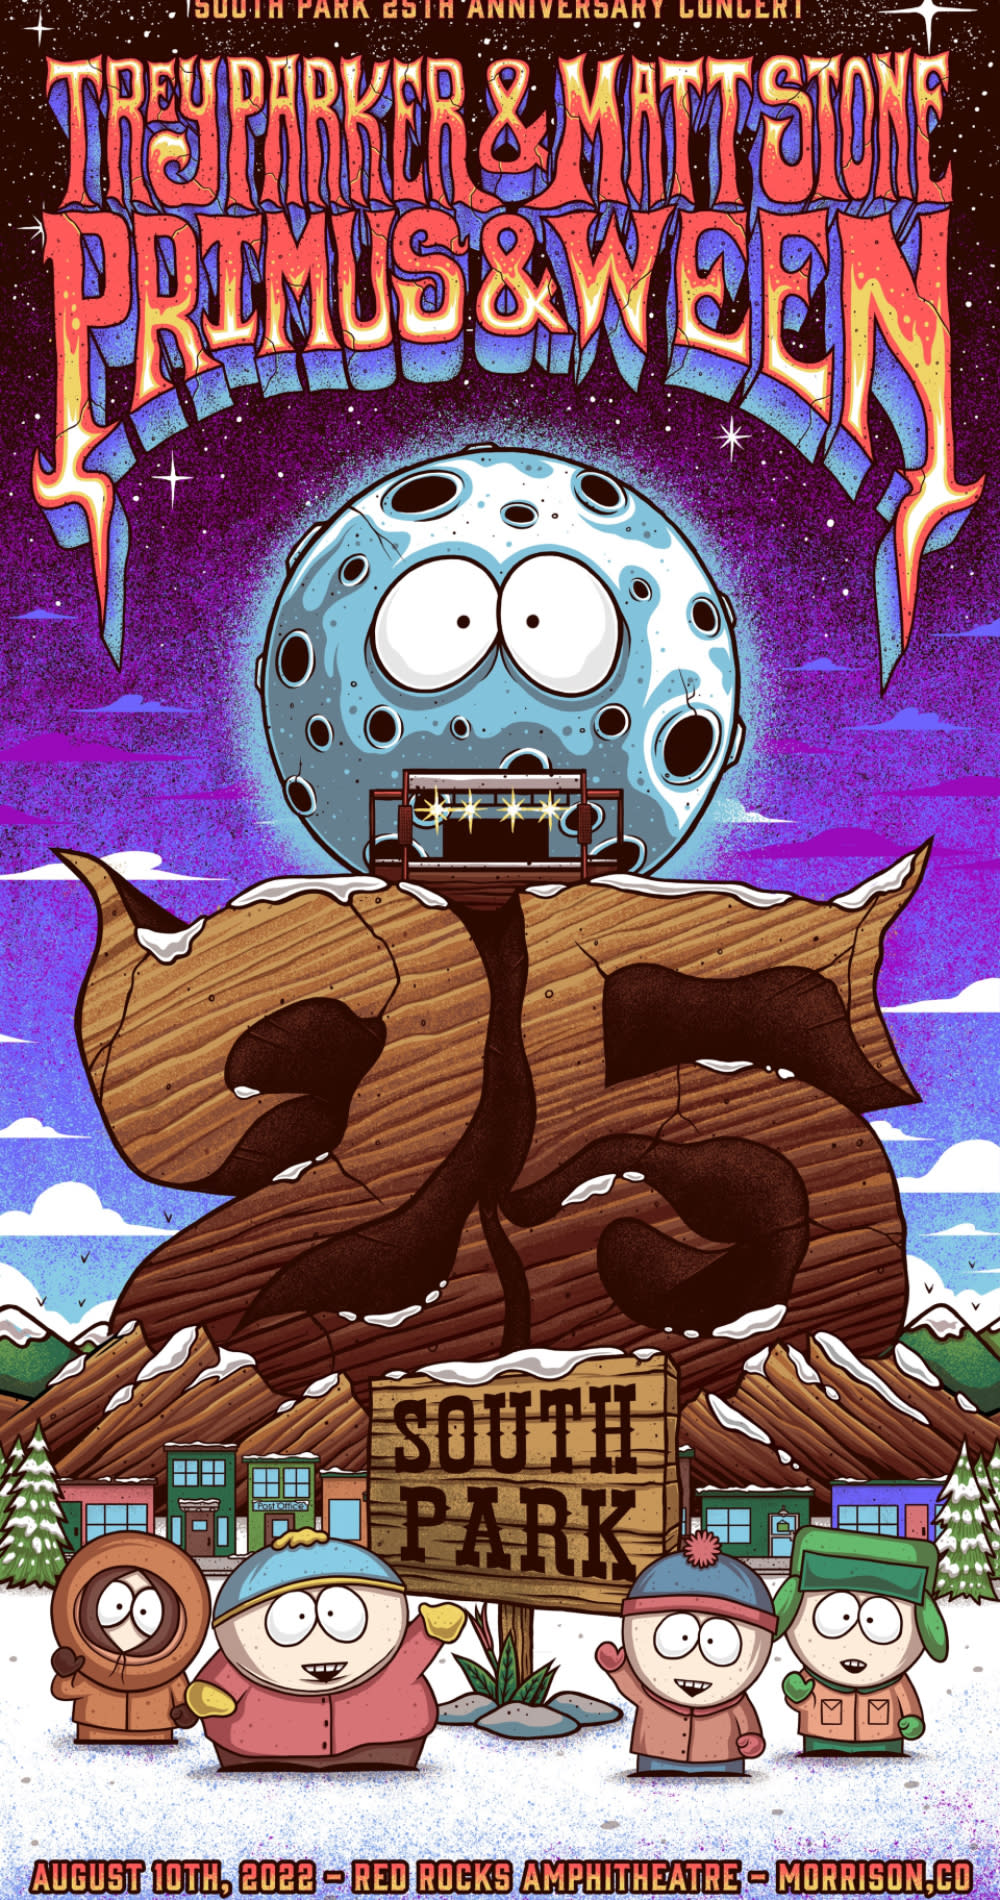 Comedy Central to Air South Park 25th Anniversary Concert Event (Exclusive)